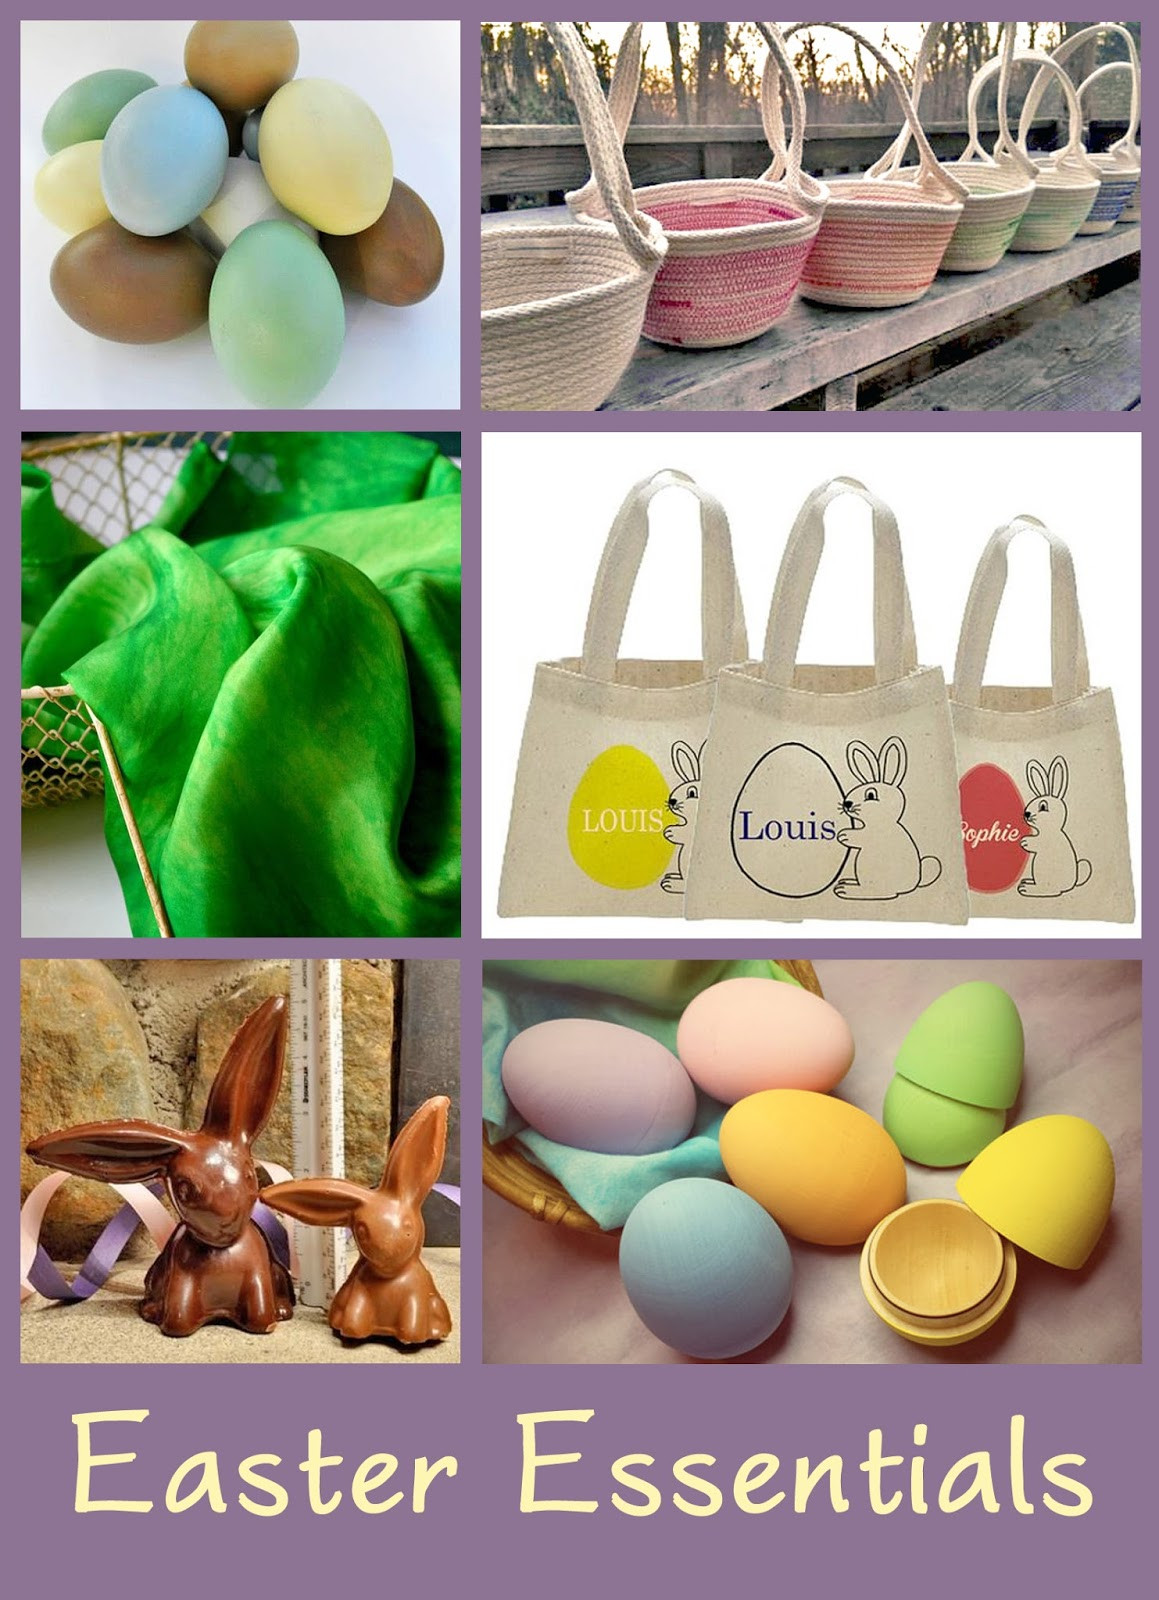 Easter Gift Ideas
 The Mindful Home Handmade Easter Basket Gift Ideas